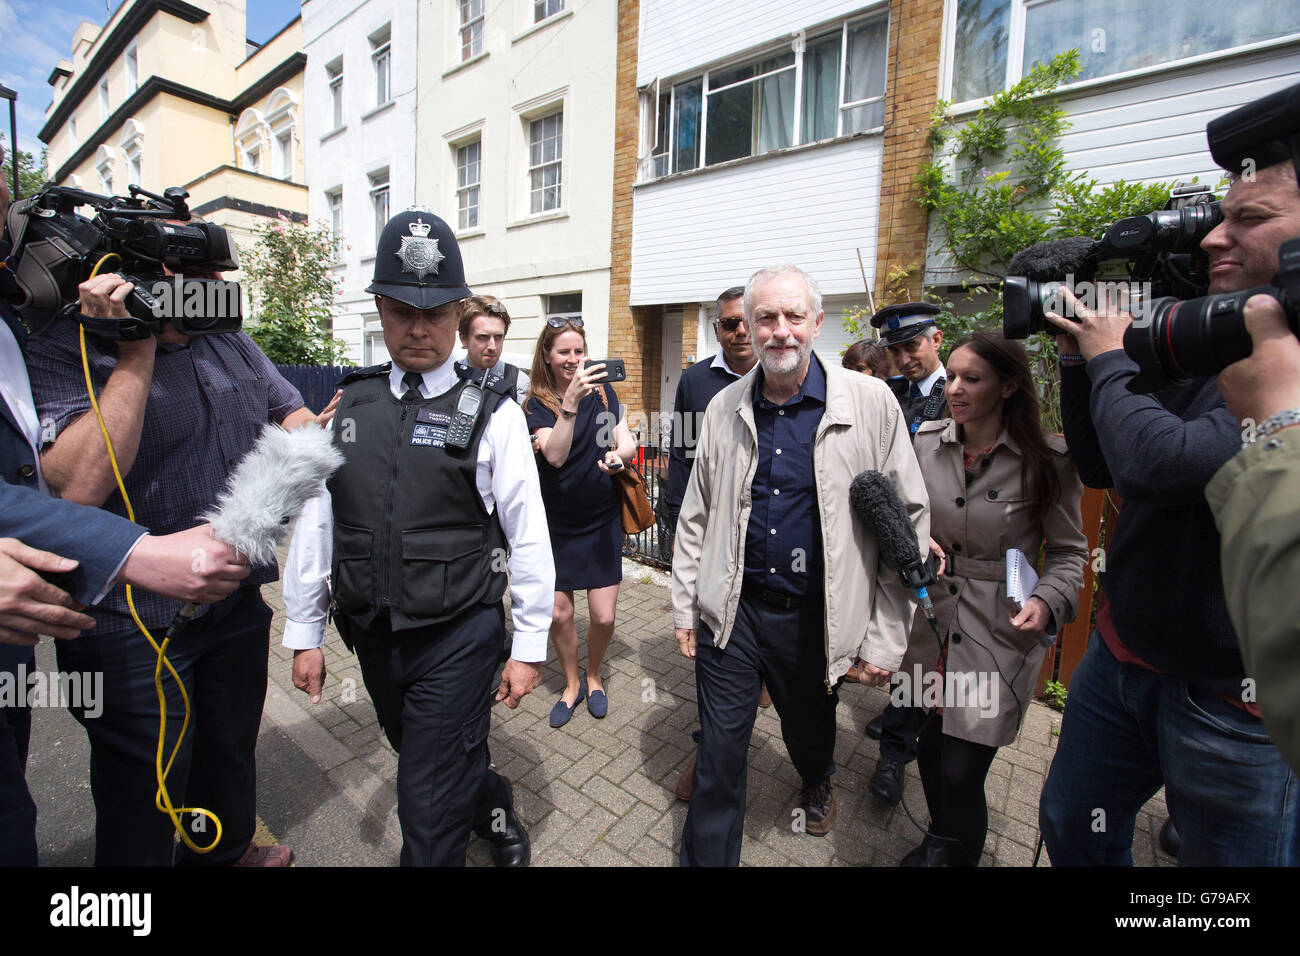 London, UK. 26th June, 2016. Press wait outside the home of Jeremy Corbyn, Leader of Labour Party in UK as fellow Shadow Cabinet party members demand his resignation from the leadership. Credit:  Jeff Gilbert/Alamy Live News Stock Photo